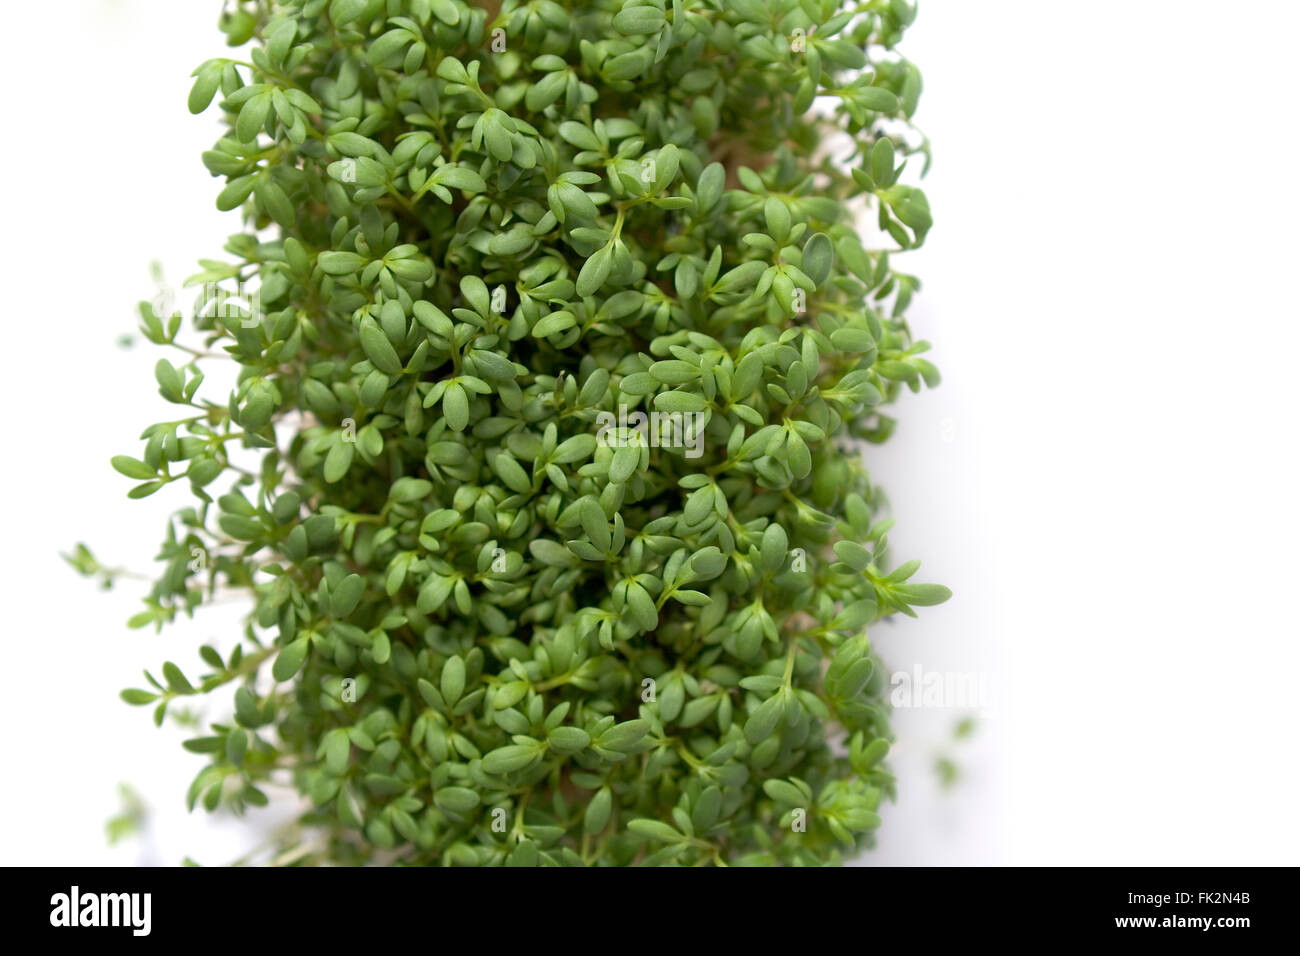 Fresh Leaves Of Garden Cress On White Background with space for text Stock Photo